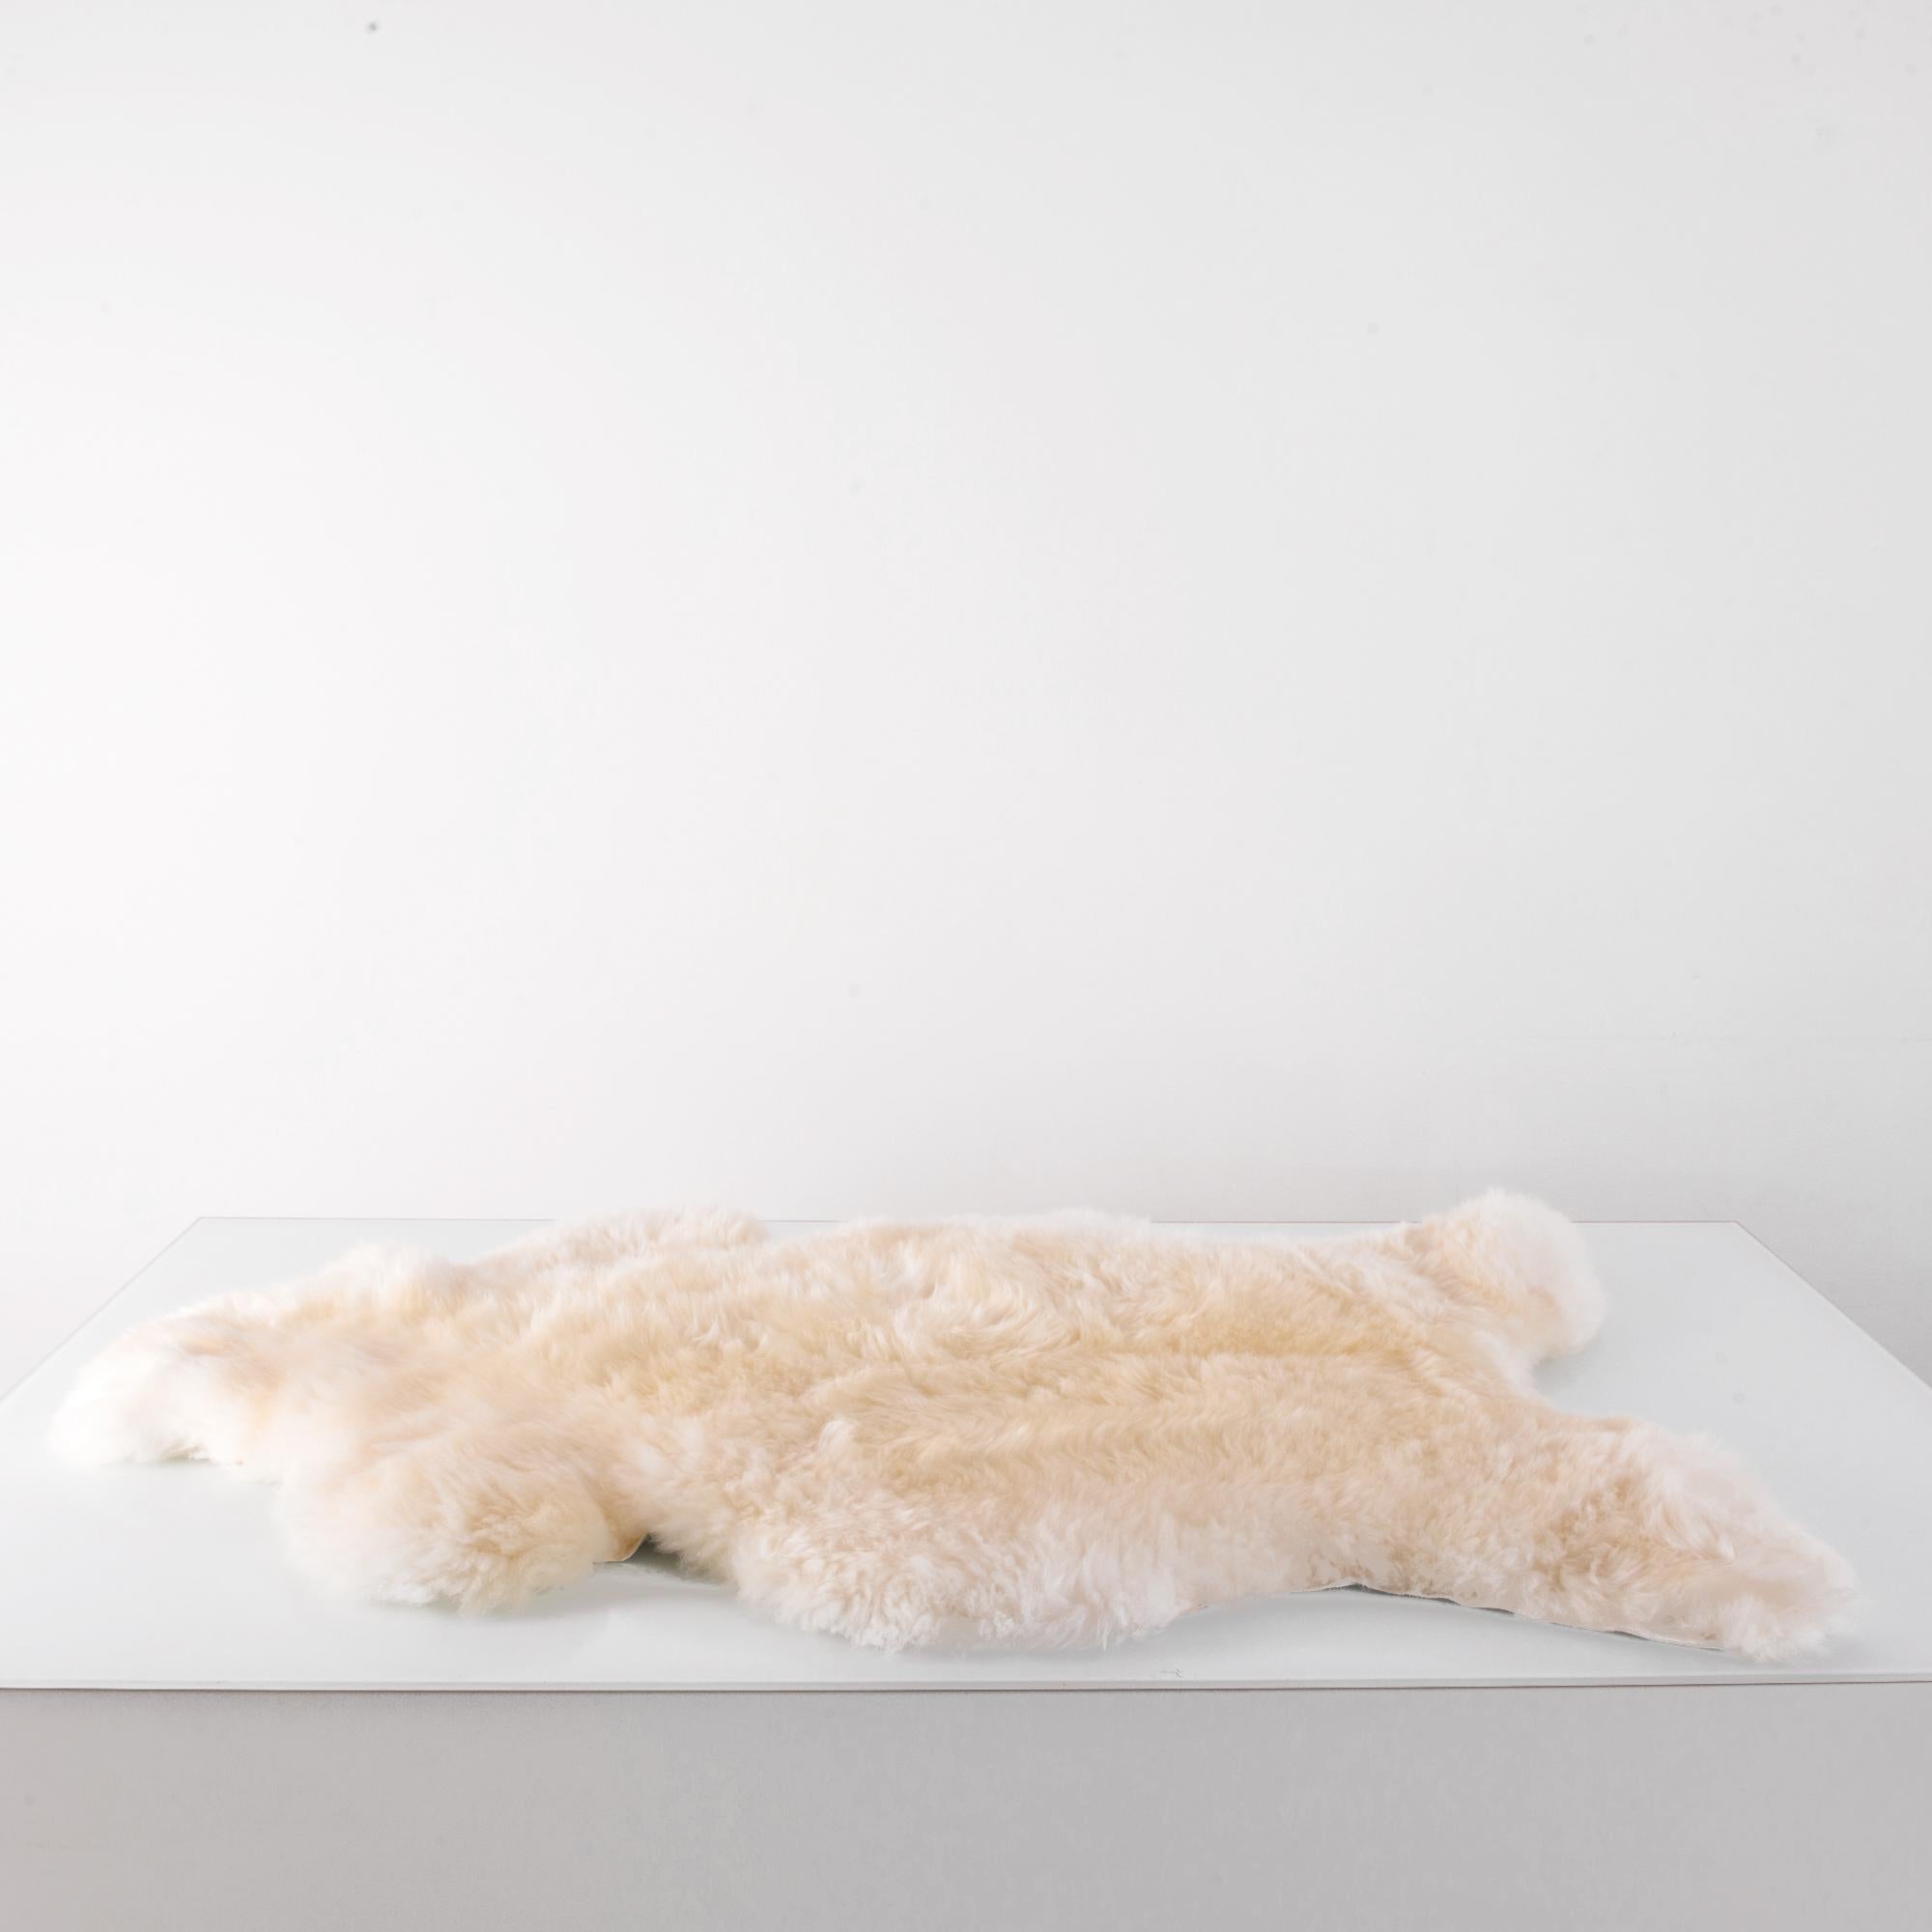 A sheepskin throw from Central Europe. The thick fleece has a pale, creamy color. The form follows the natural line of the sheepskin. Warm and cosy, yet possessed of a soft, dreamy, cloud-like quality, this sheepskin throw provides a timeless